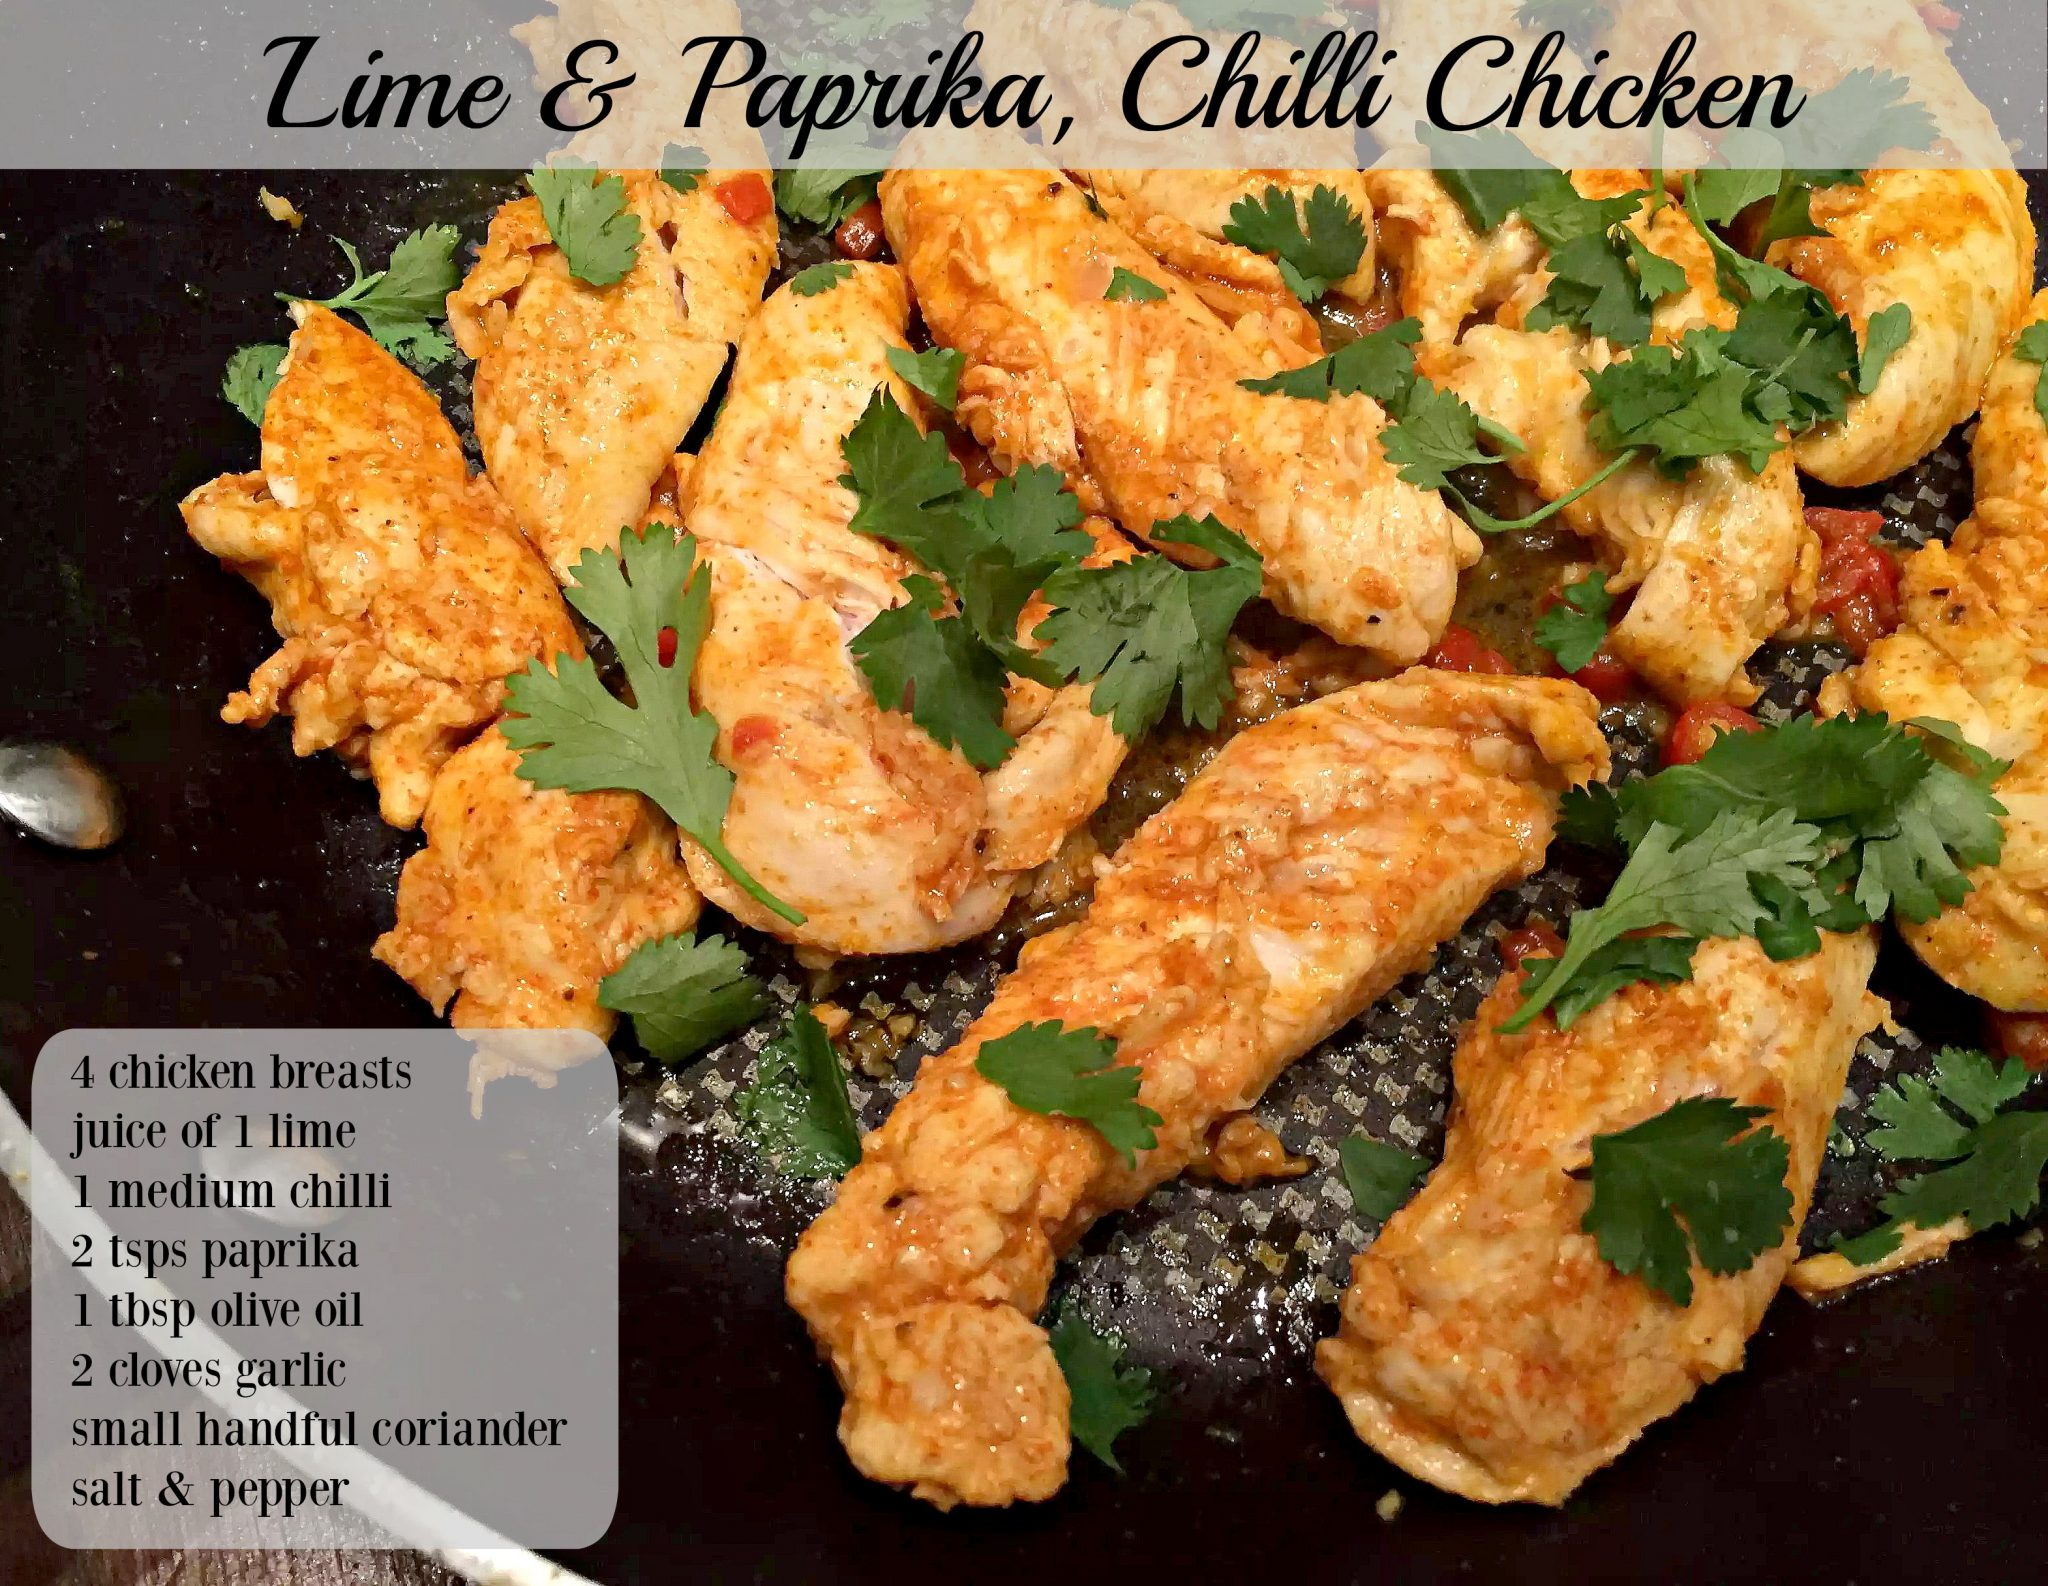 Lime & Paprika marinated Chicken from Emma Eats & Explores - SCD, Paleo, Dairy-Free, Gluten-Free, Grain-Free, Sugar-Free, Clean-Eating